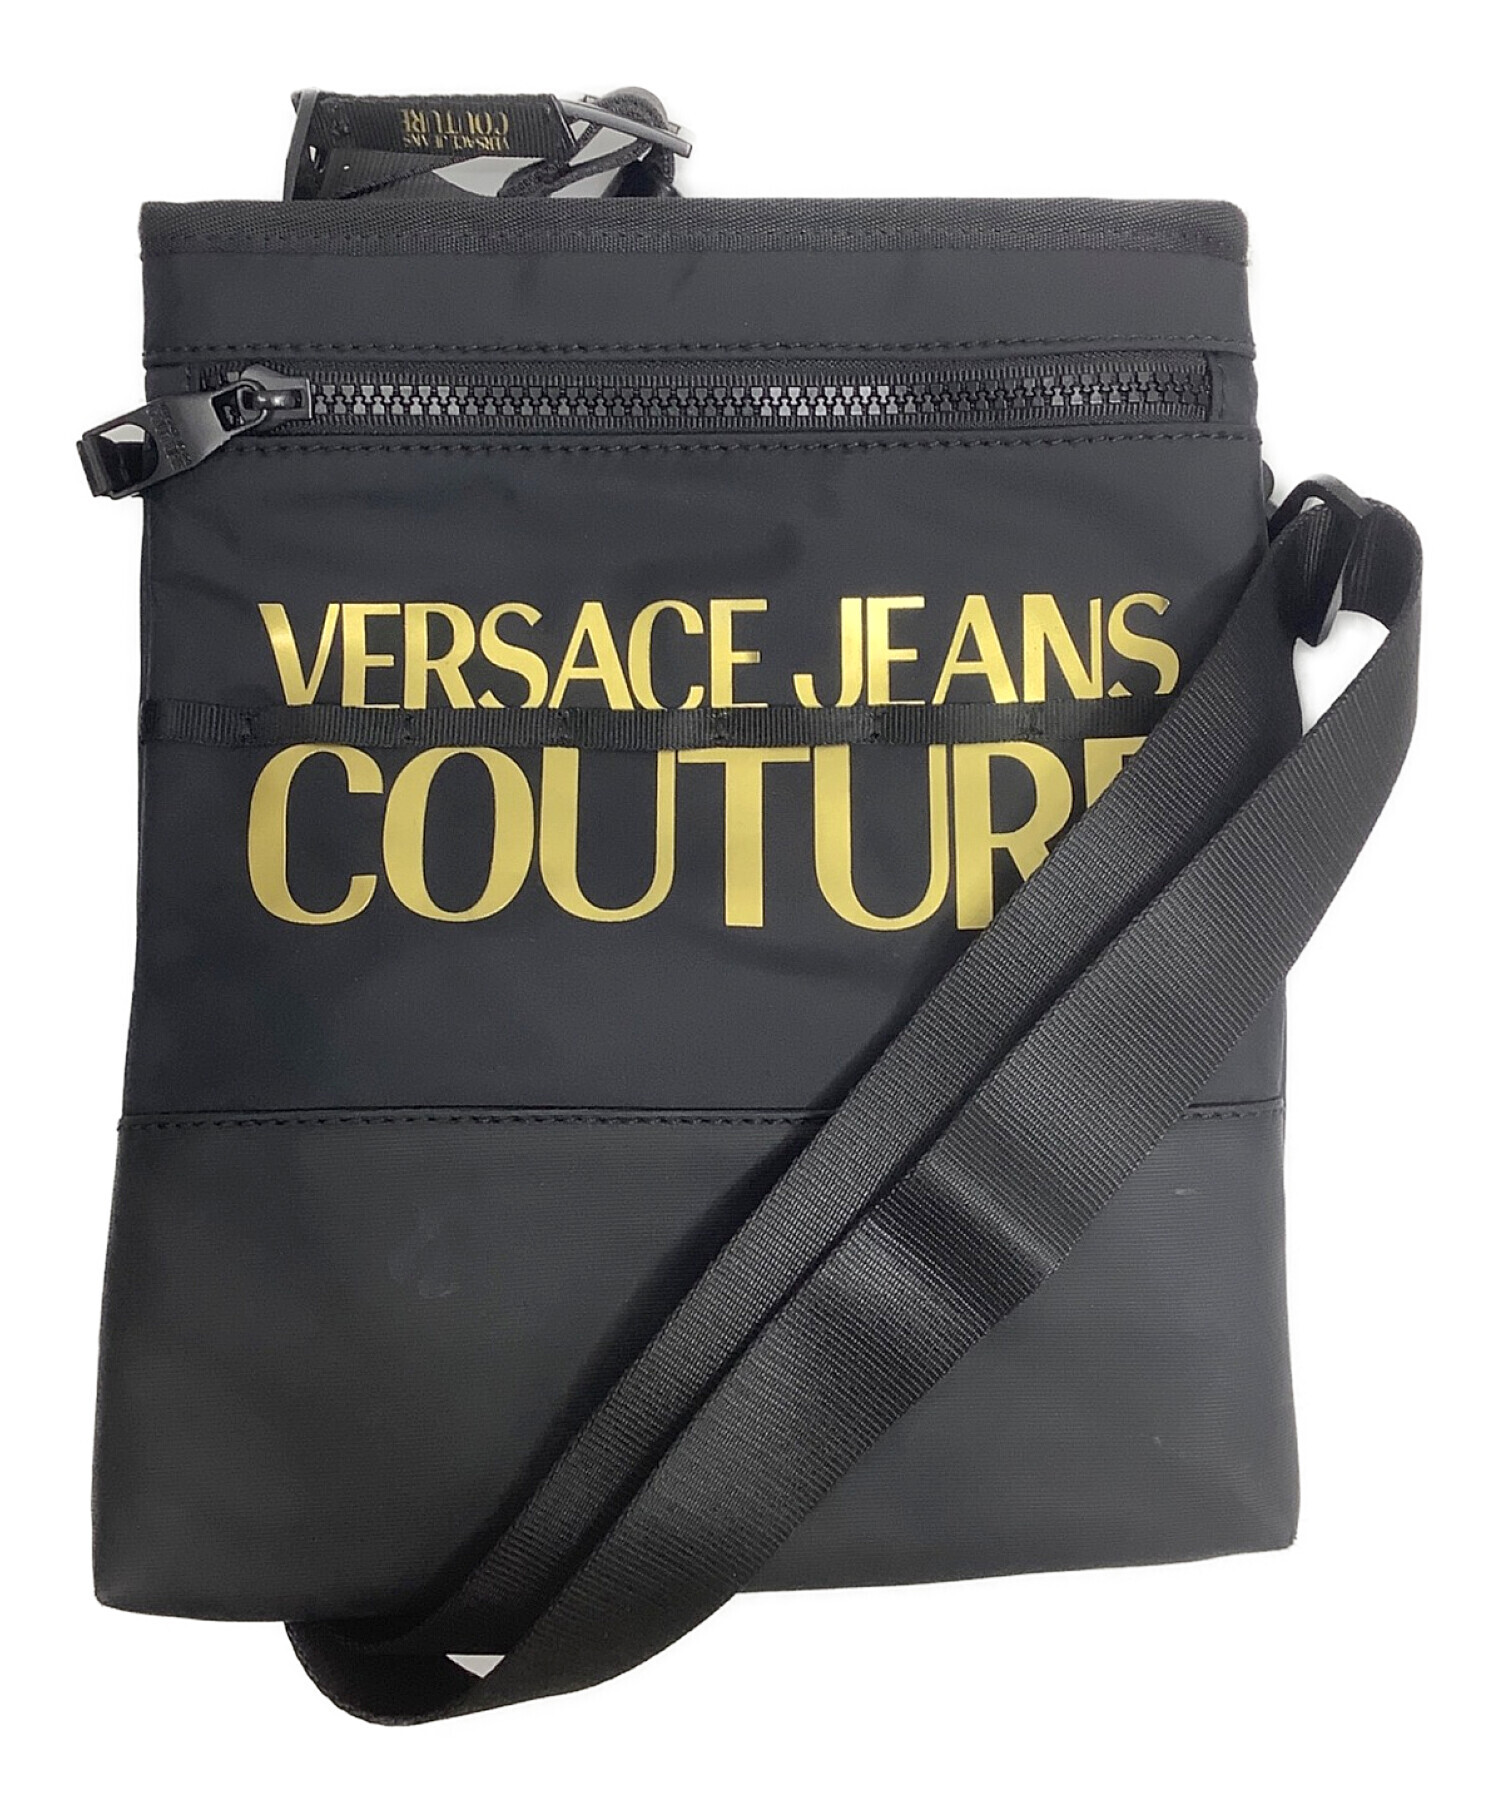 VERSACE JEANS COUTURE ショルダーバッグ ブラック - バッグ